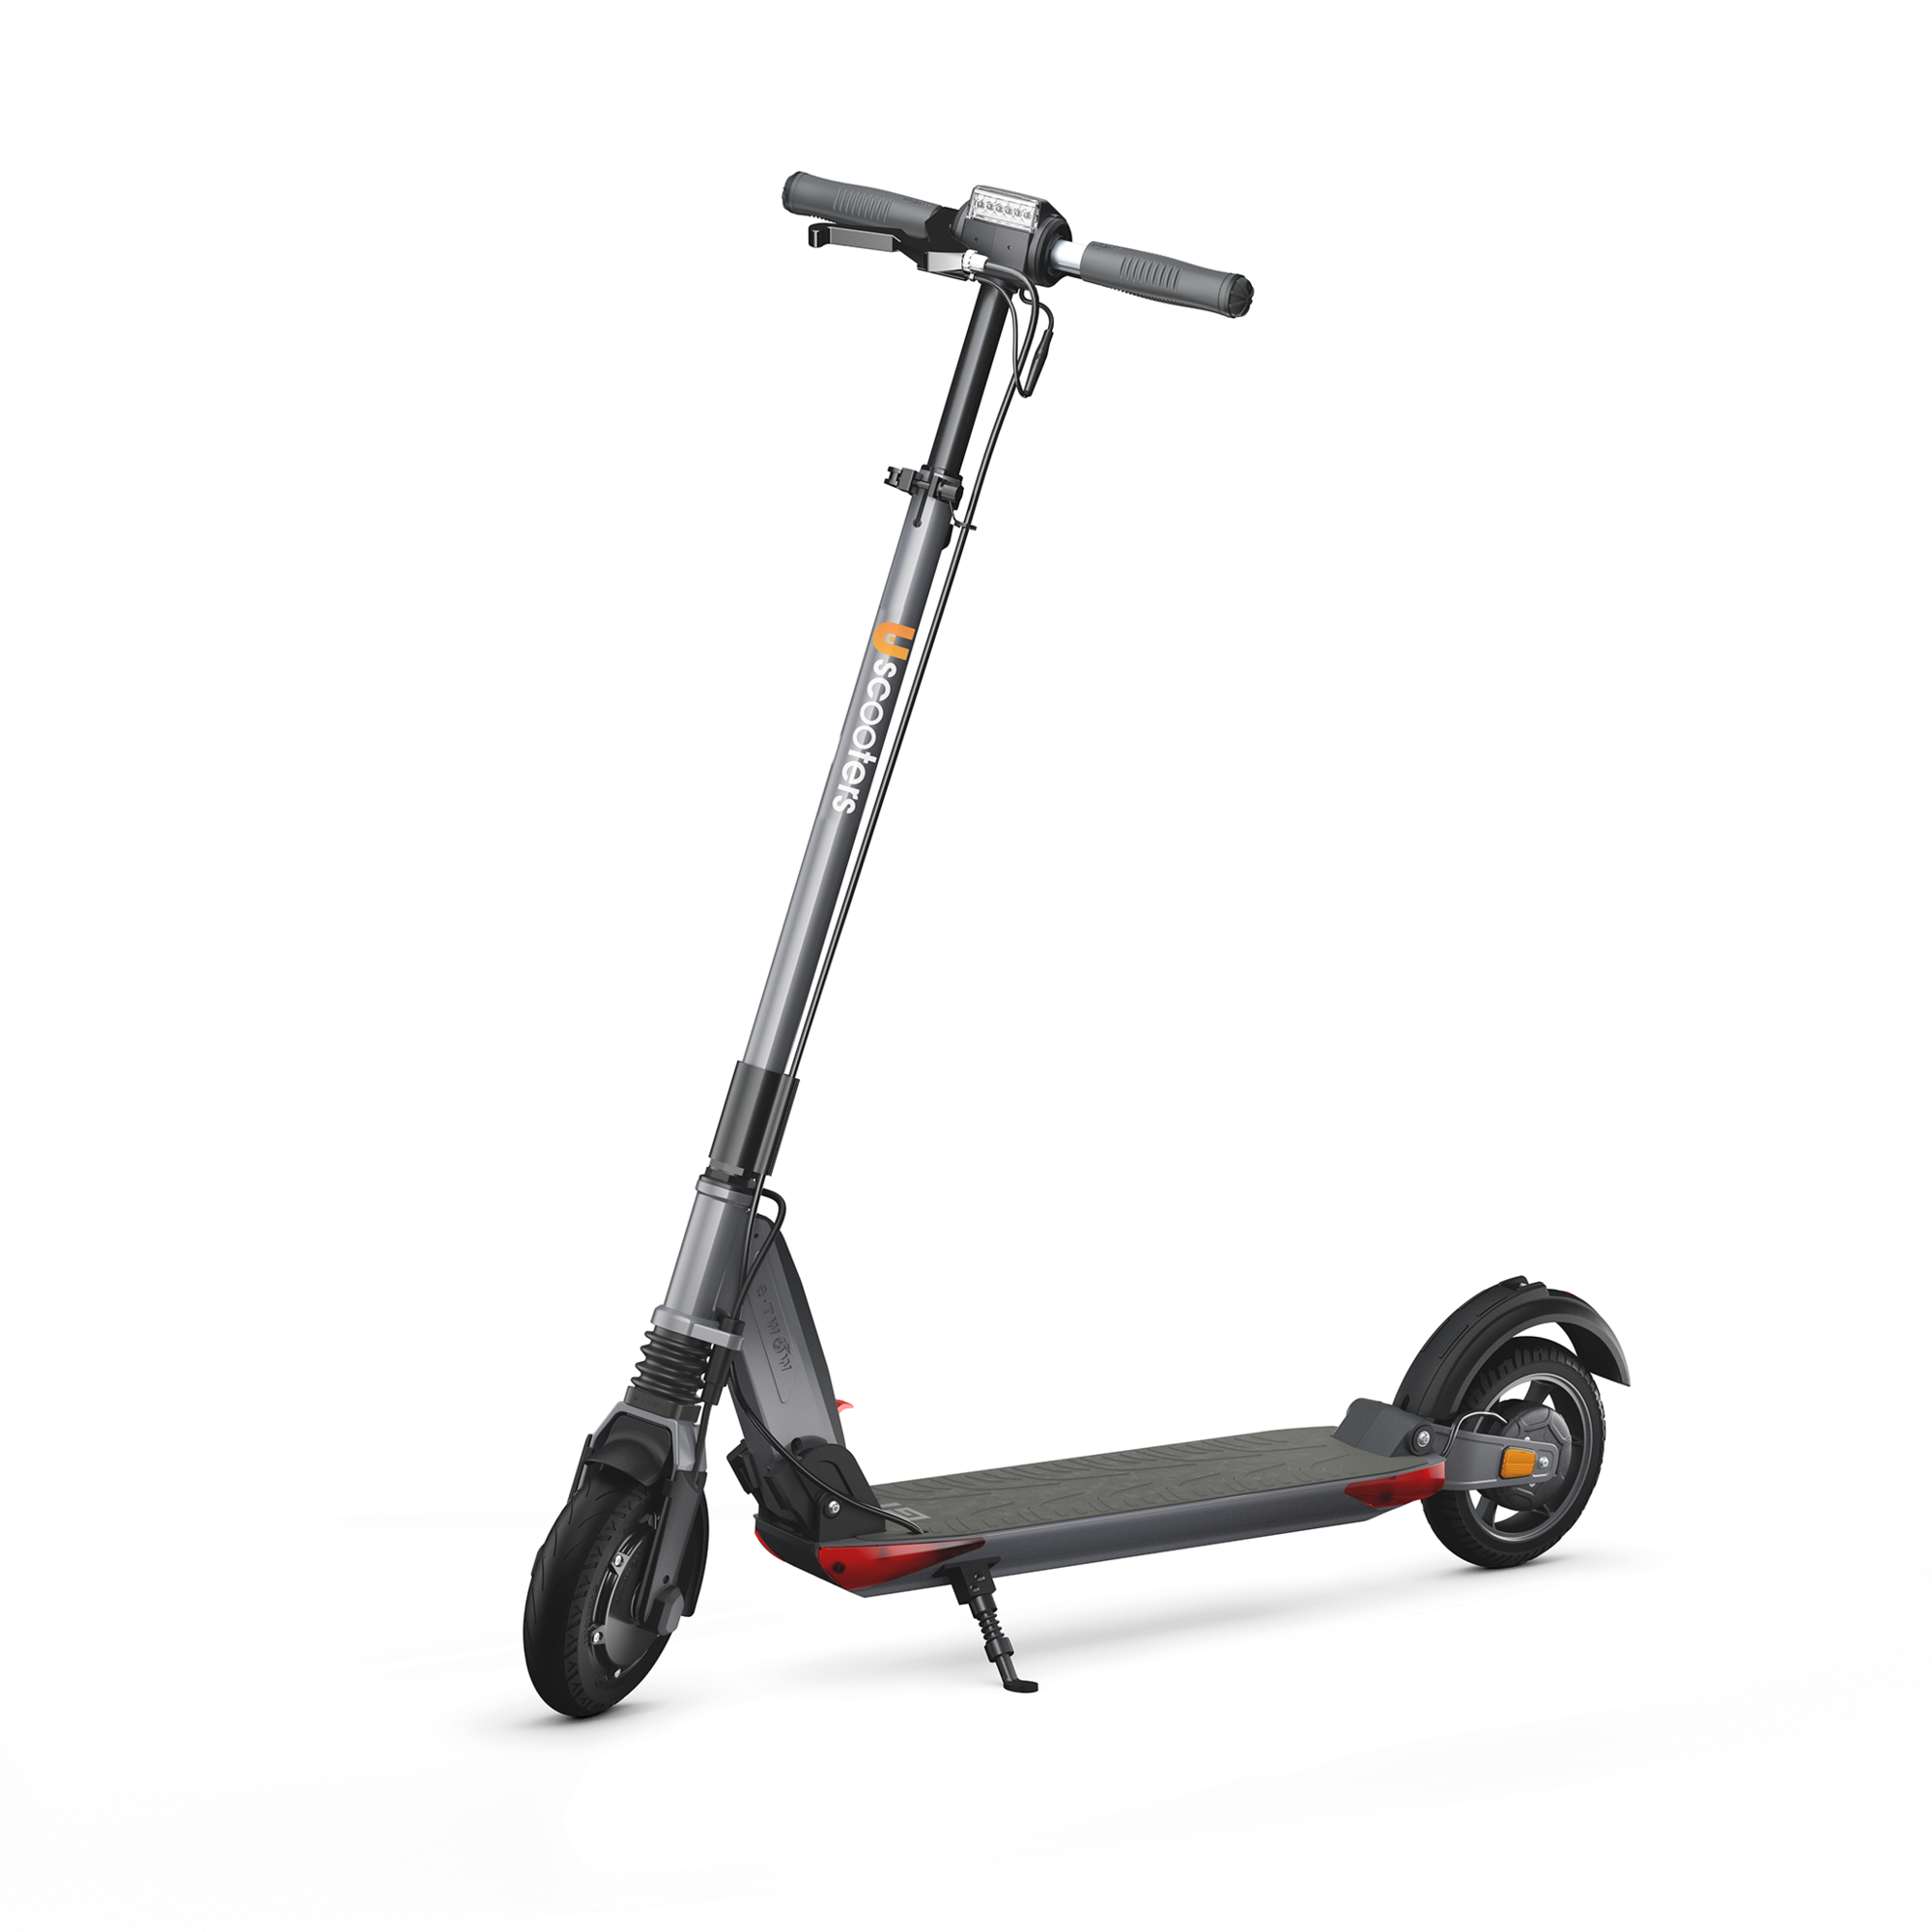 Jolly Modtagelig for Afstem The New GT | Buy Premium Quality Electric Scooter | Easy Transportation -  E-TWOW - Premium Electric Scooters